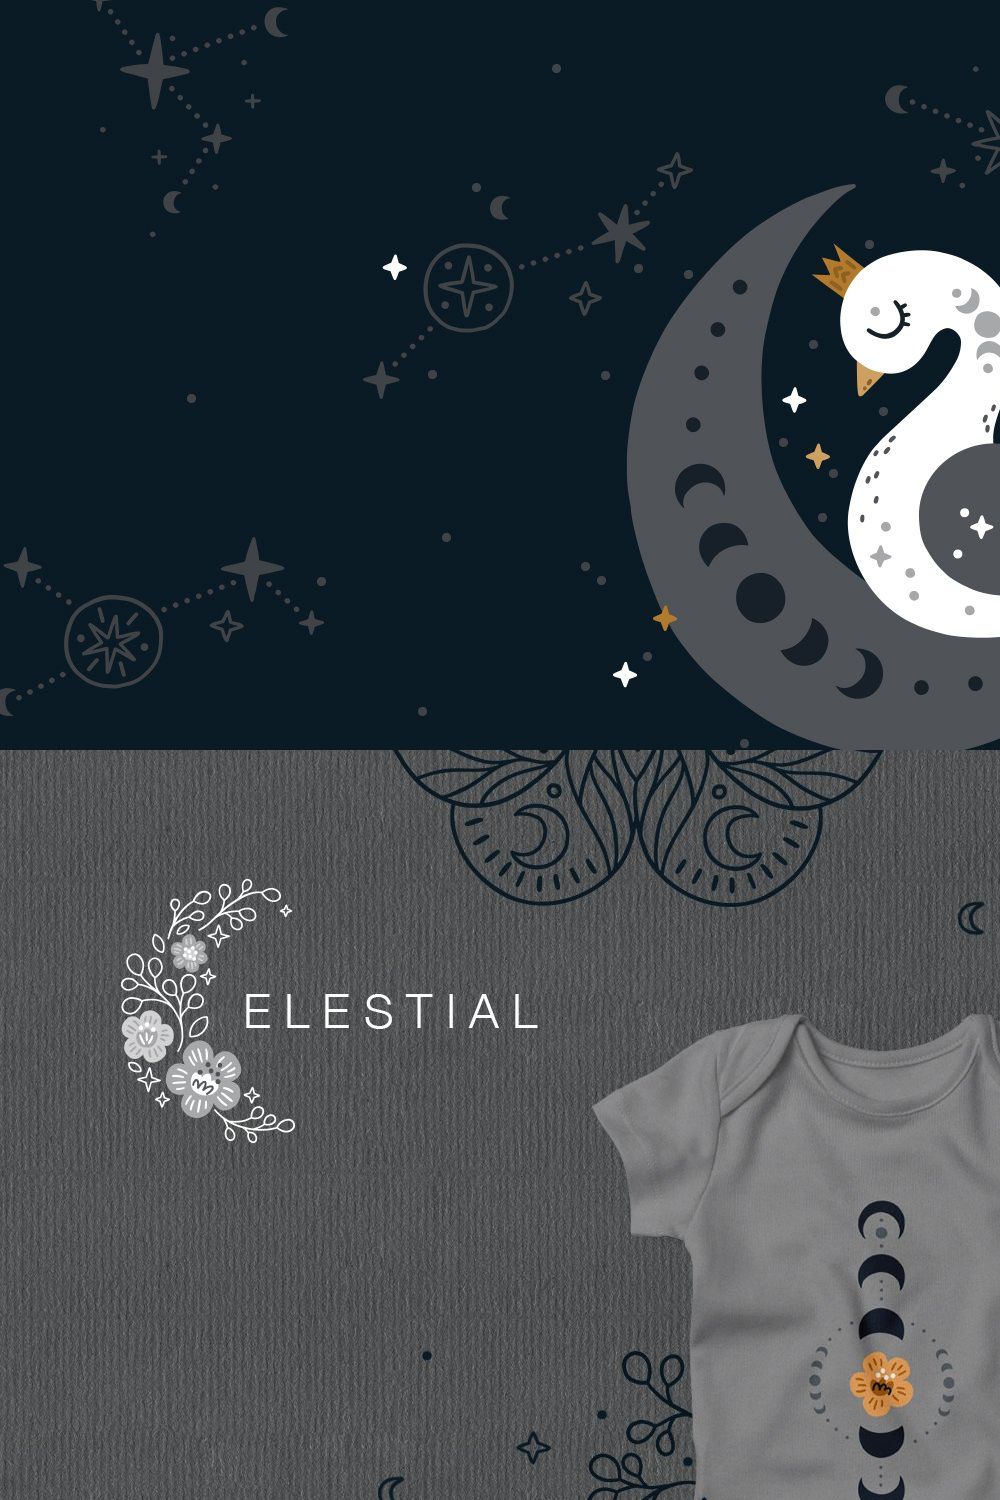 Celestial – stars and moon pinterest preview image.